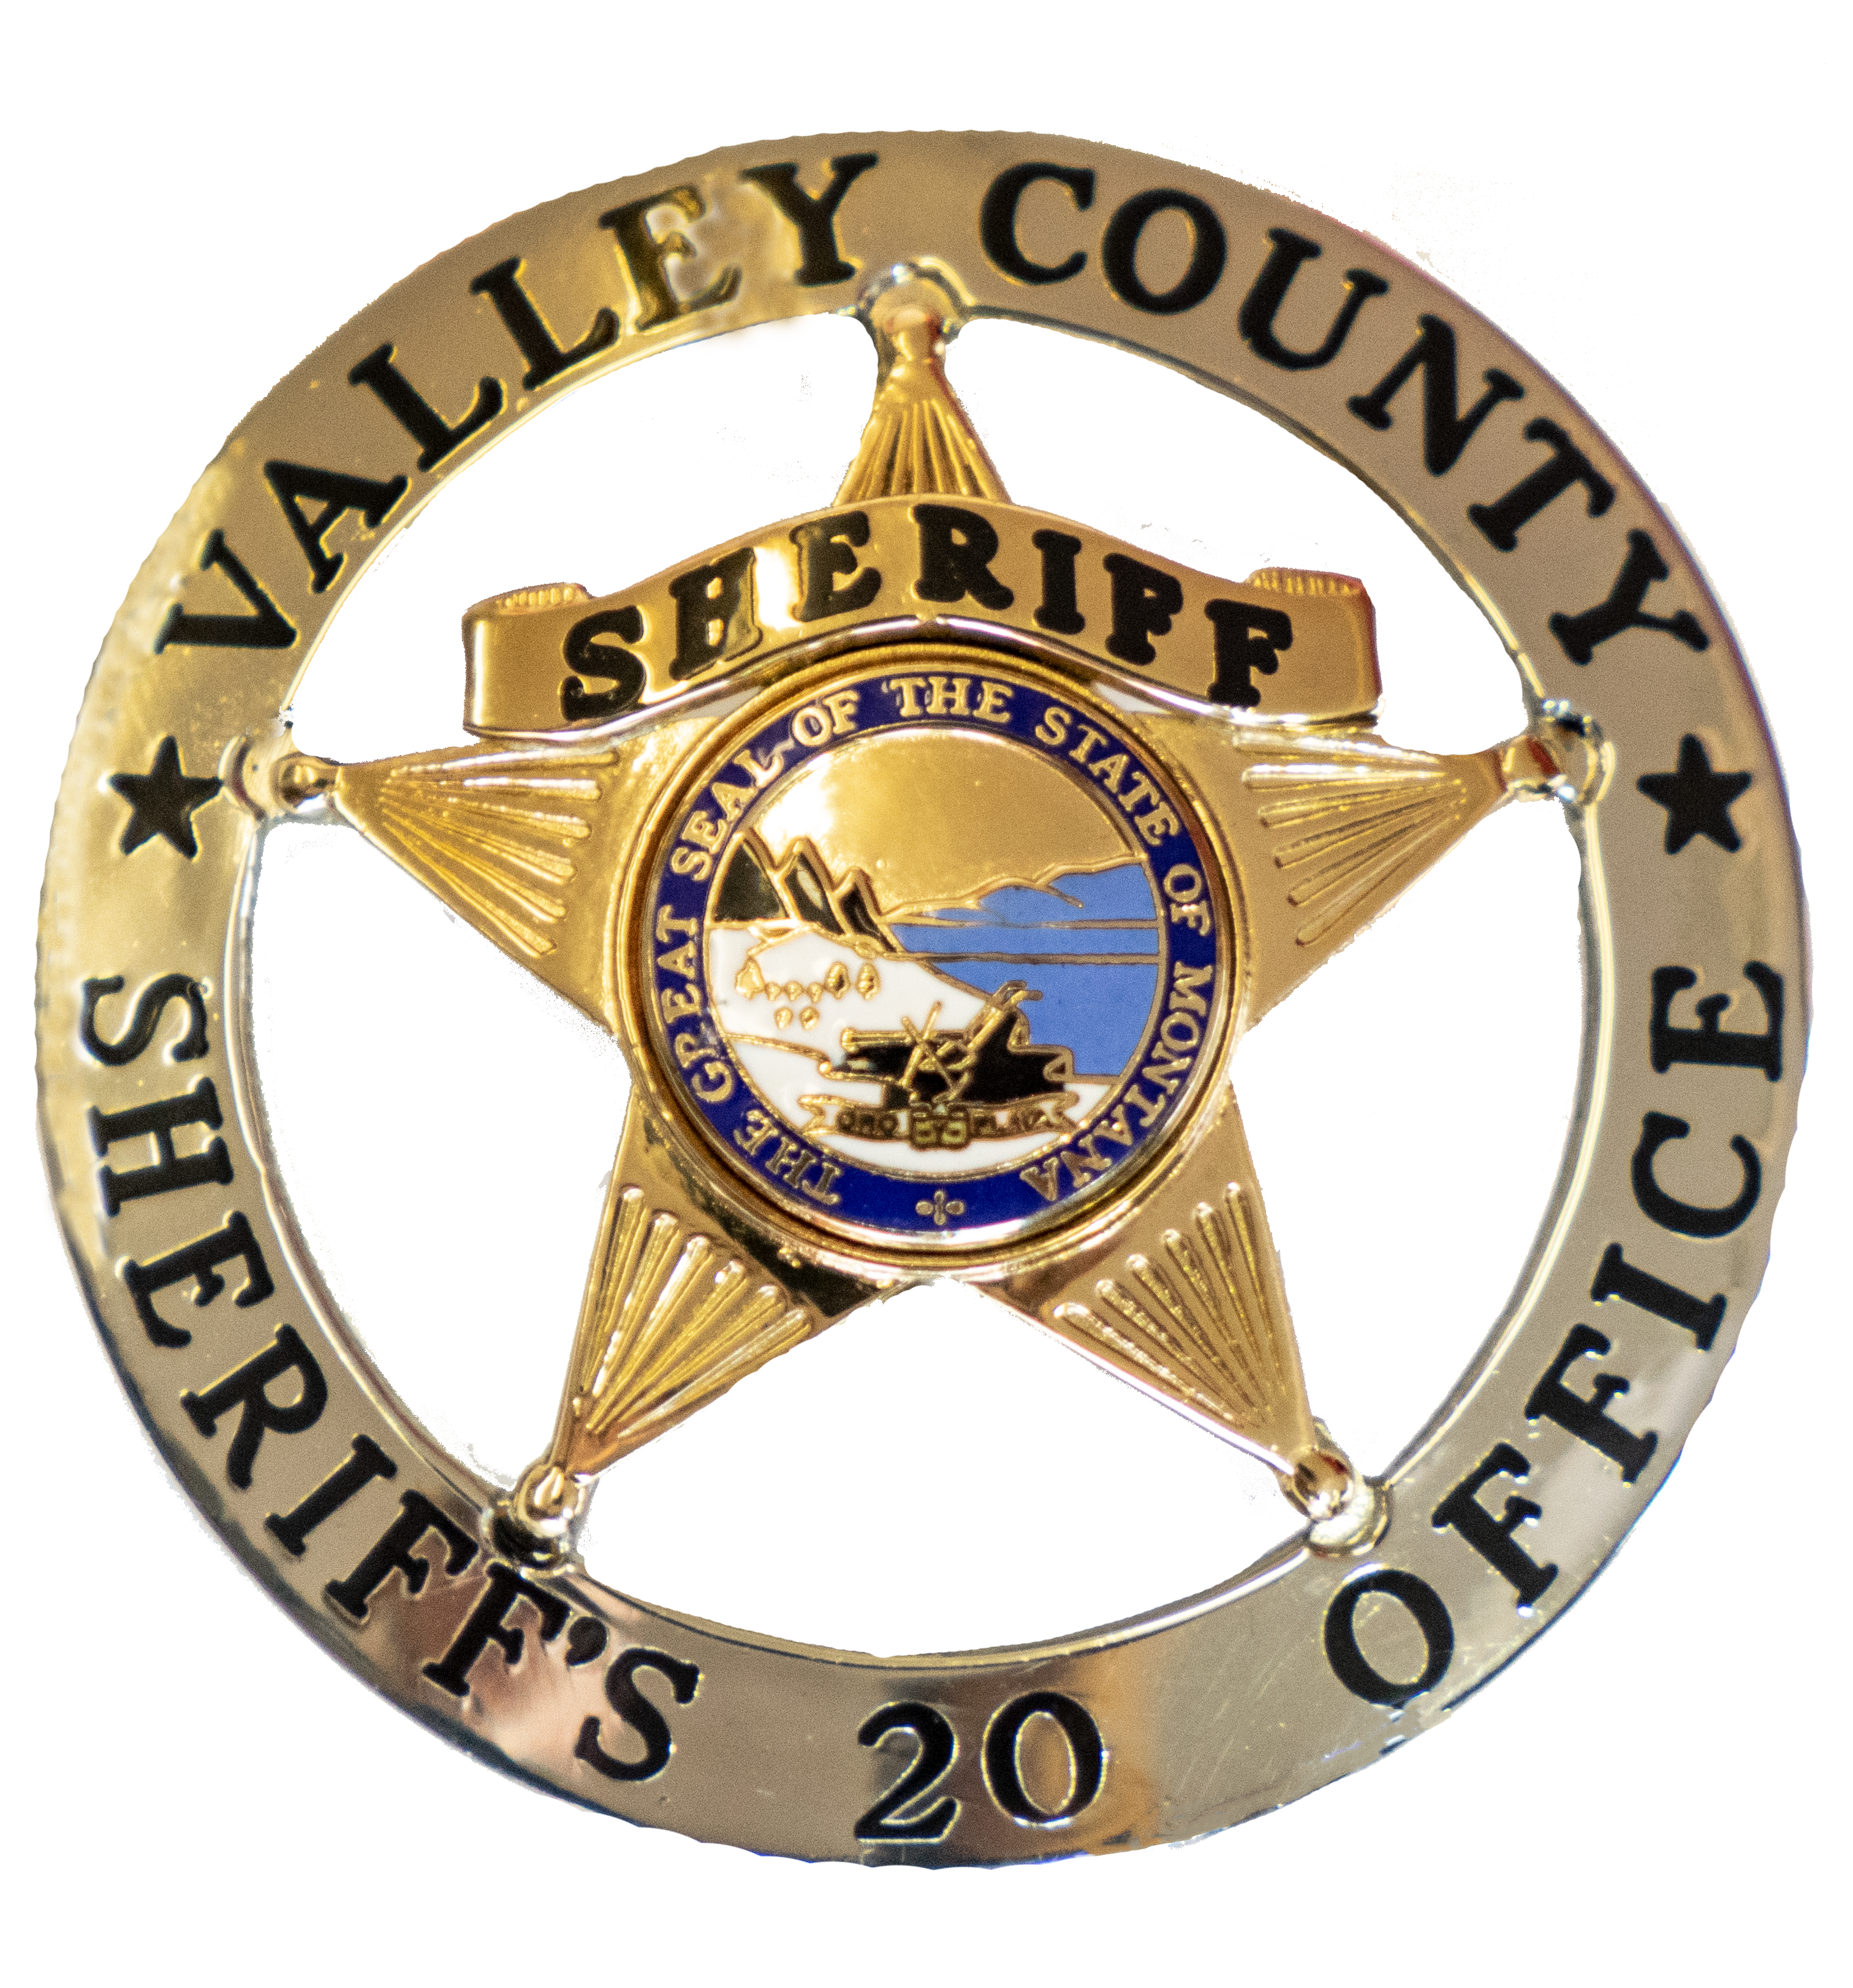 Valley County Sheriff's Office, MT Police Jobs